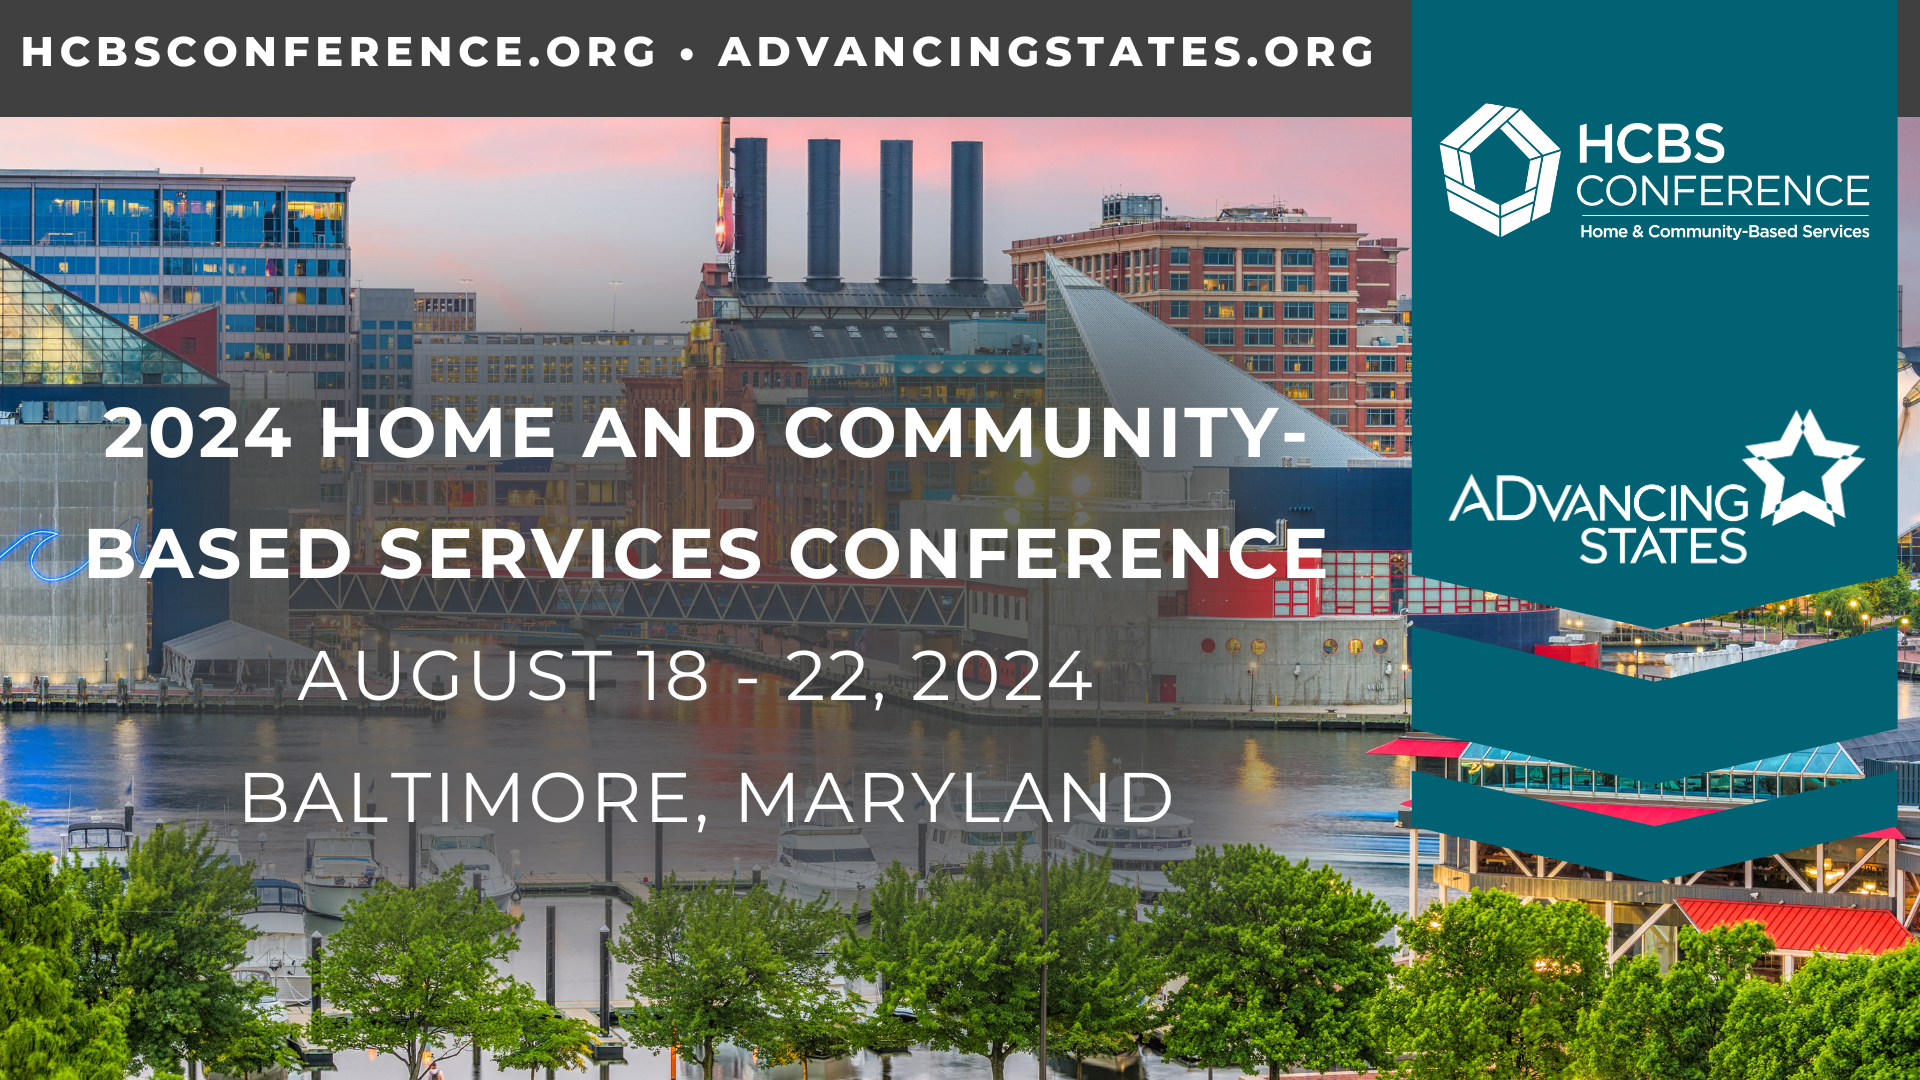 2024 Home and Community-Based Services Conference AUGUST 18 - 22, 2024  BALTIMORE, MARYLAND